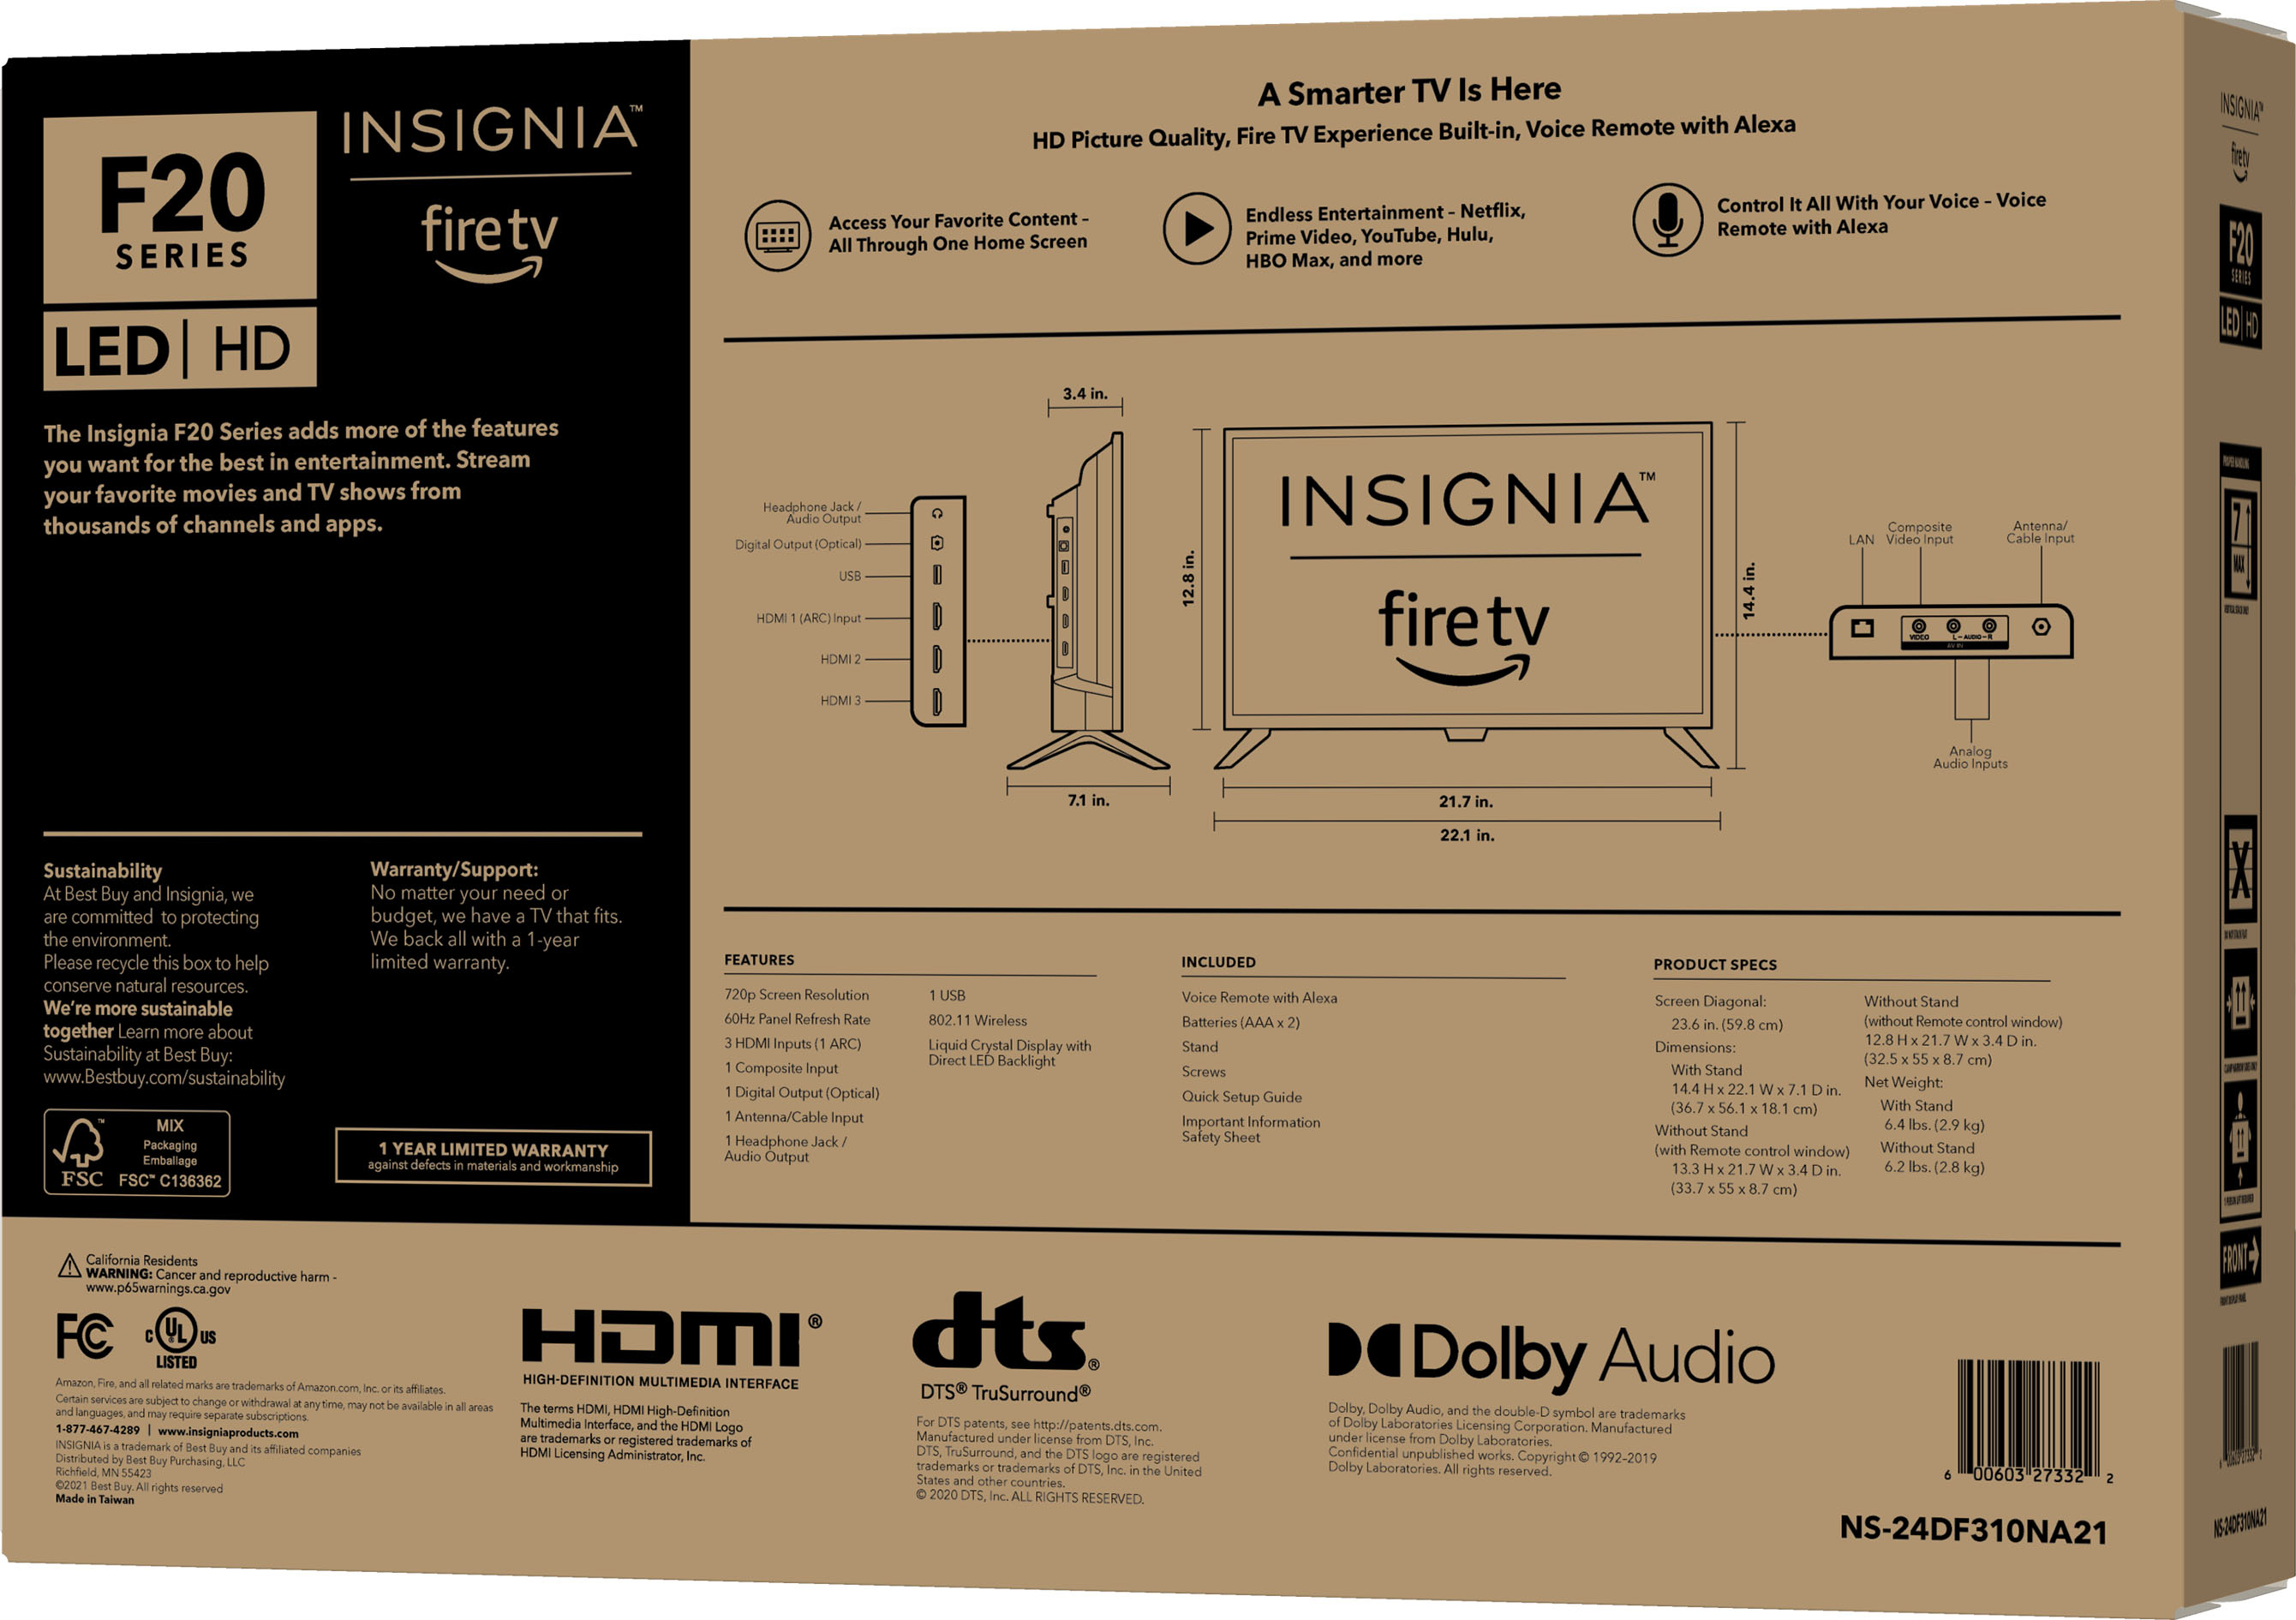 This 24-inch Insignia Fire TV is a steal at $100 - CNET